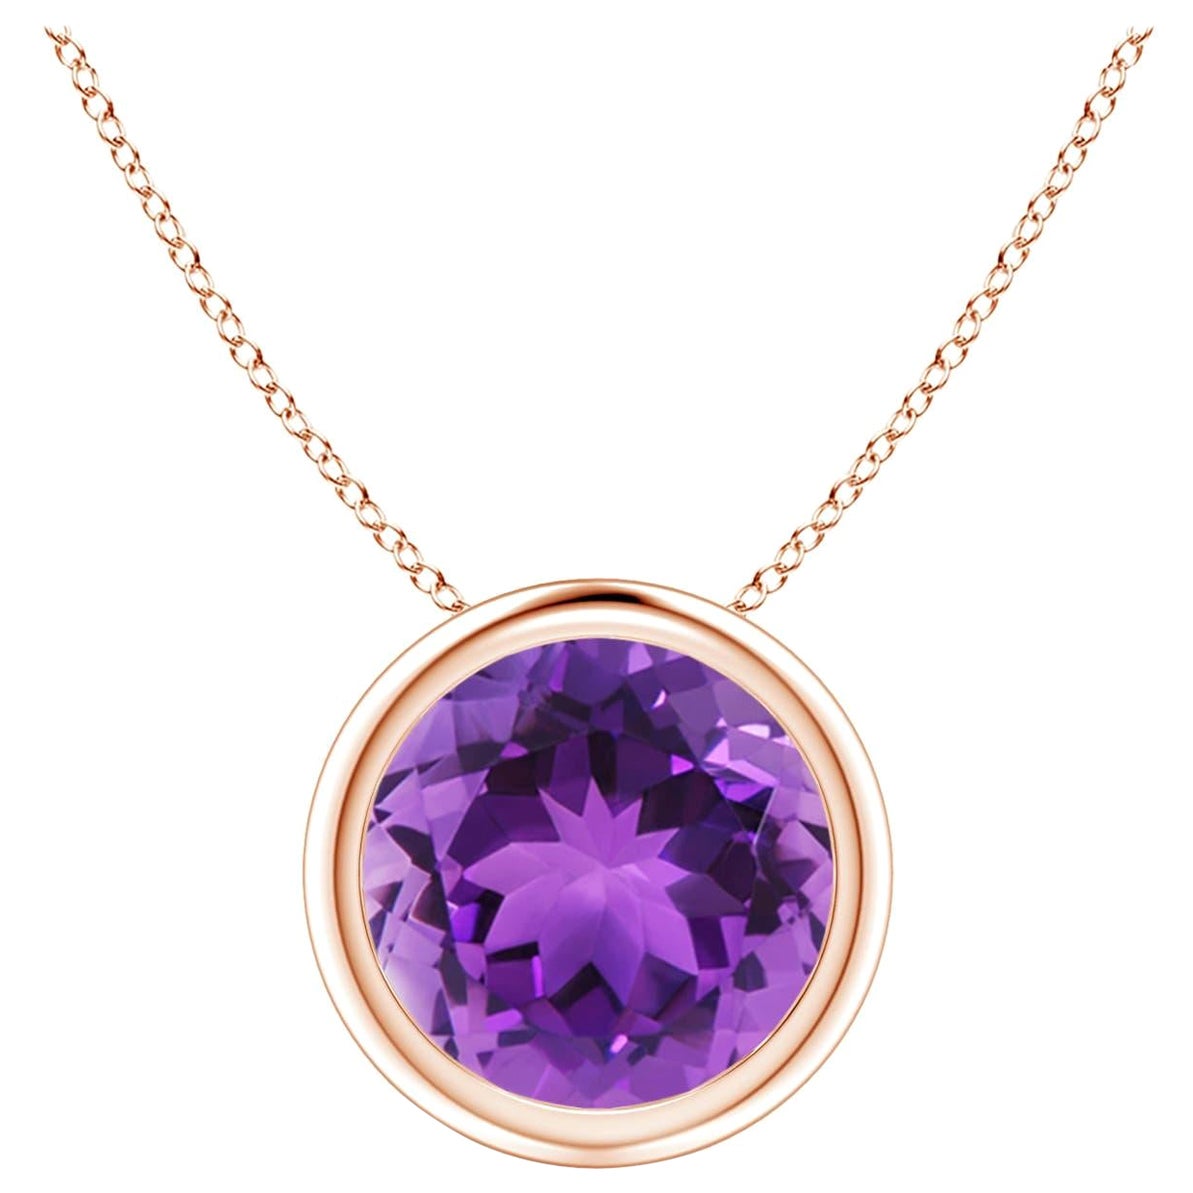 Natural Bezel-Set Round 1.7ct Amethyst Solitaire Pendant in 14K Rose Gold